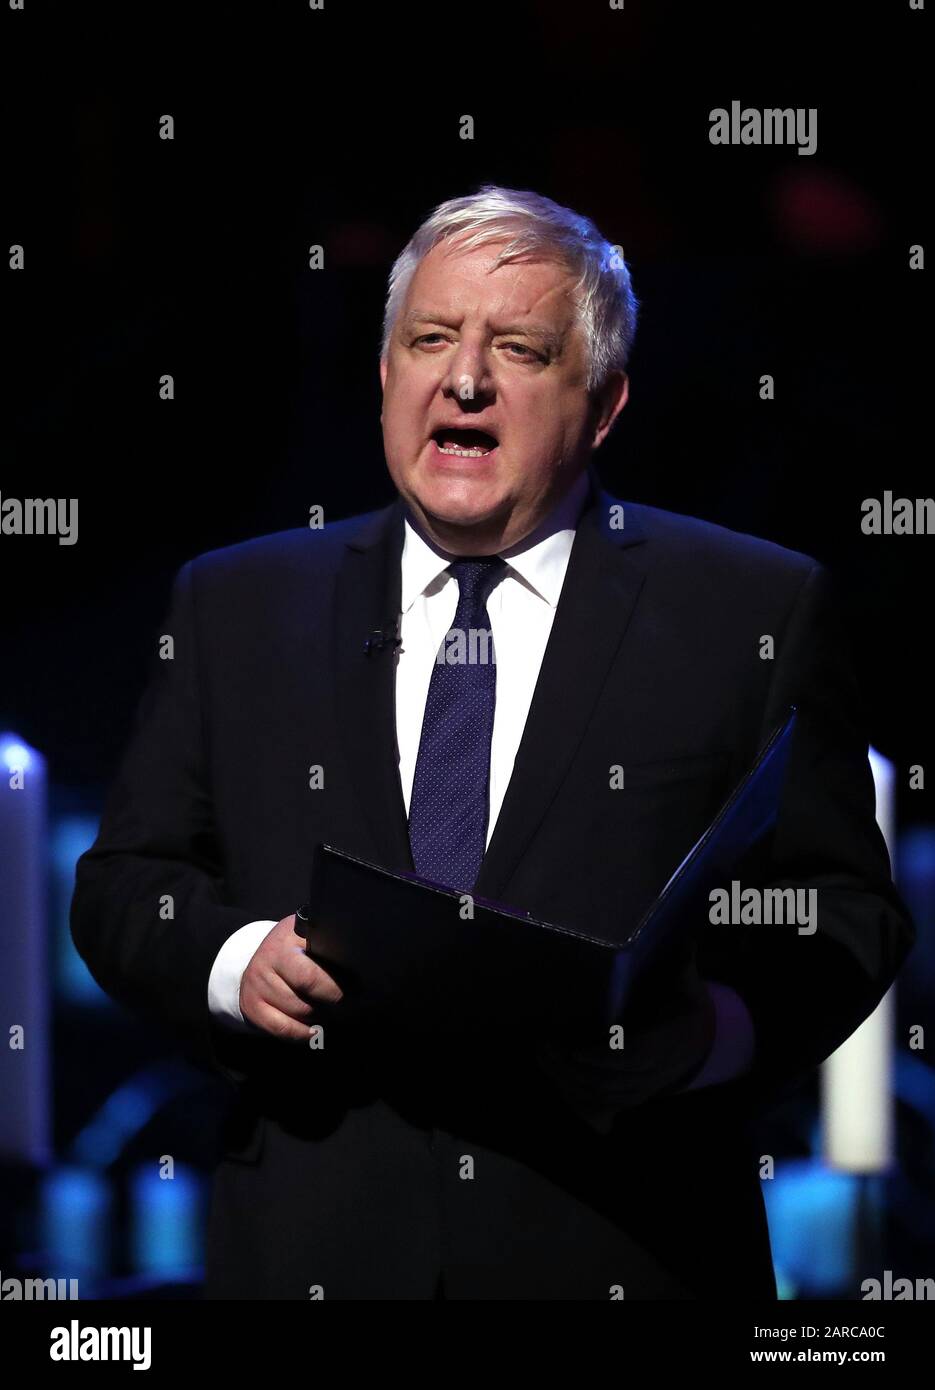 Sir Simon Russell Beale reading during the UK Holocaust Memorial Day Commemorative Ceremony at Central Hall in Westminster, London. Stock Photo